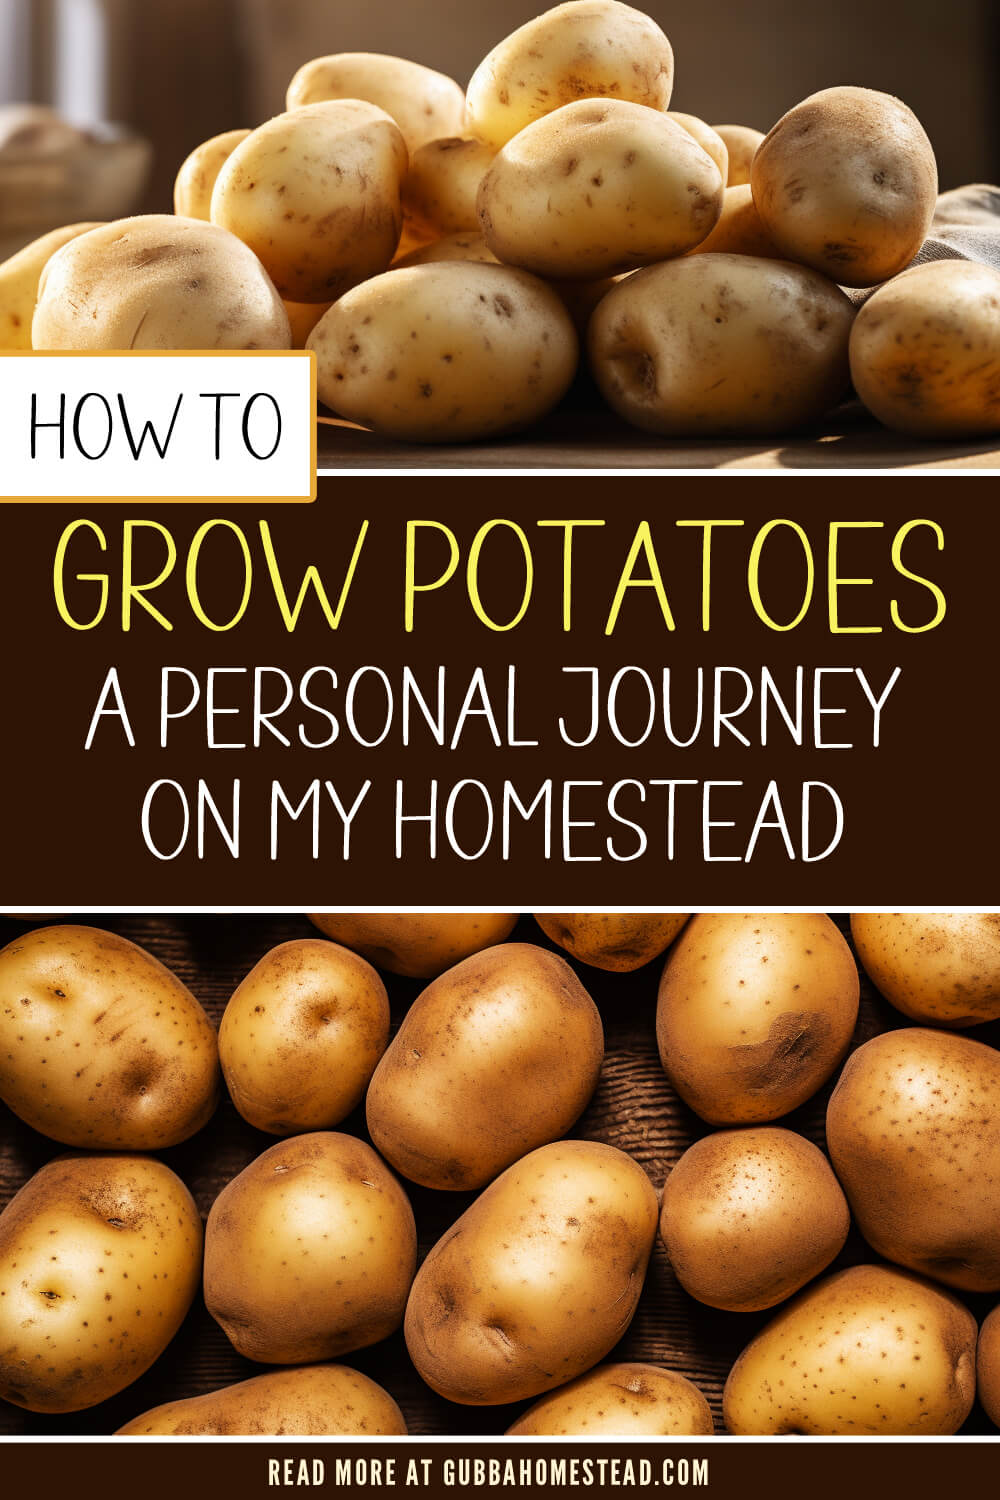 How to Grow Potatoes: A Personal Journey on My Homestead